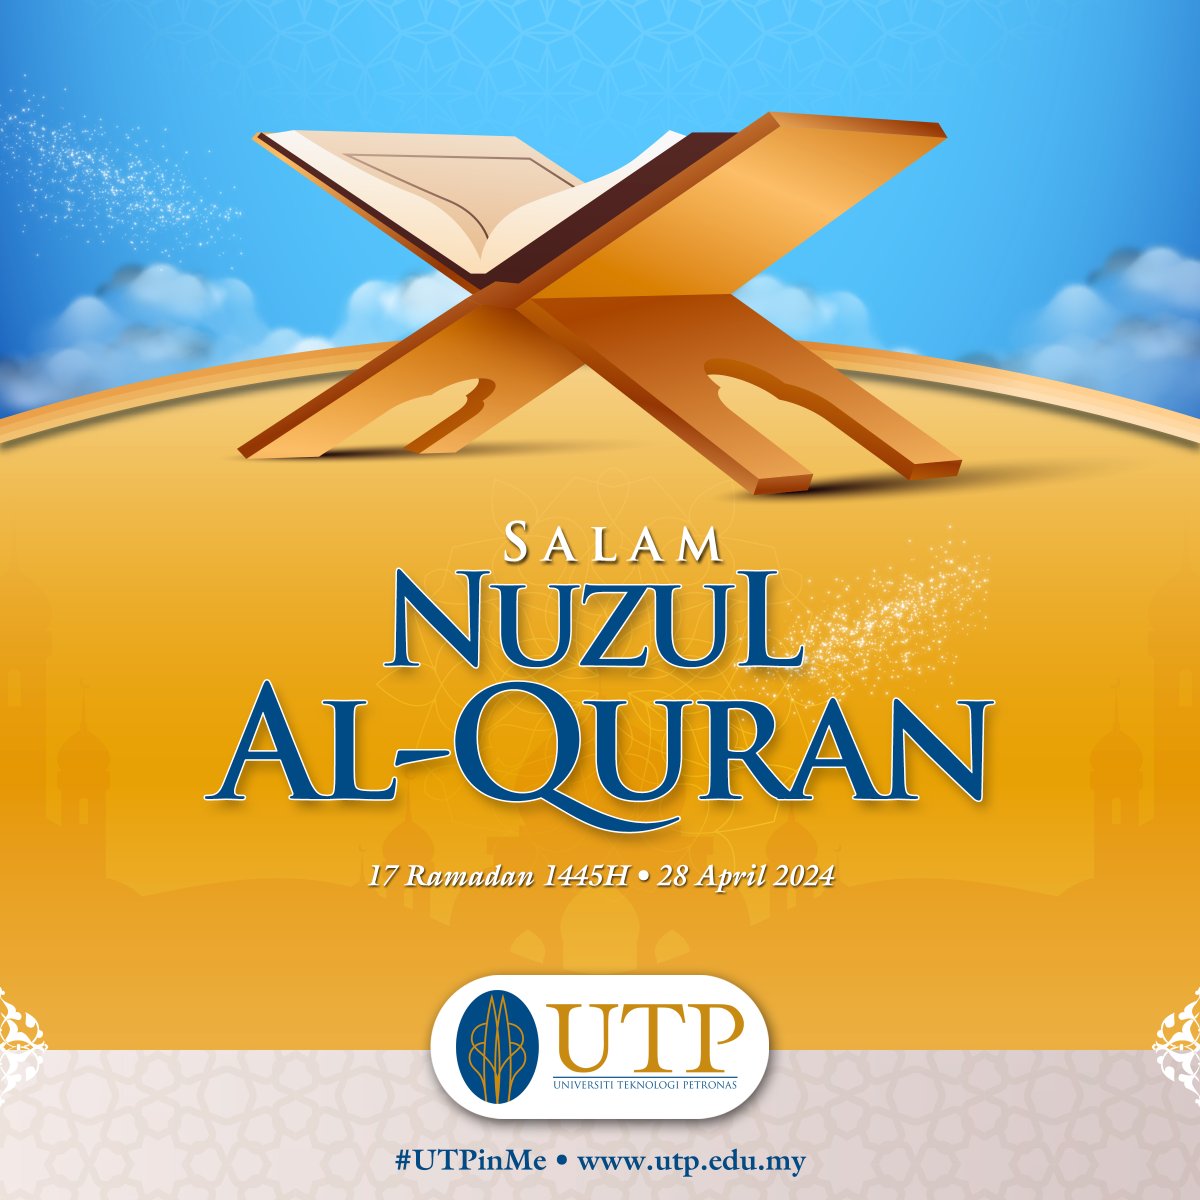 UTP sincerely wishes Salam Nuzul Al-Quran. Let us persevere in reading and reflecting the Quran, as it reflects the disposition of those who seek wisdom, counsel, and guidance from its verses.